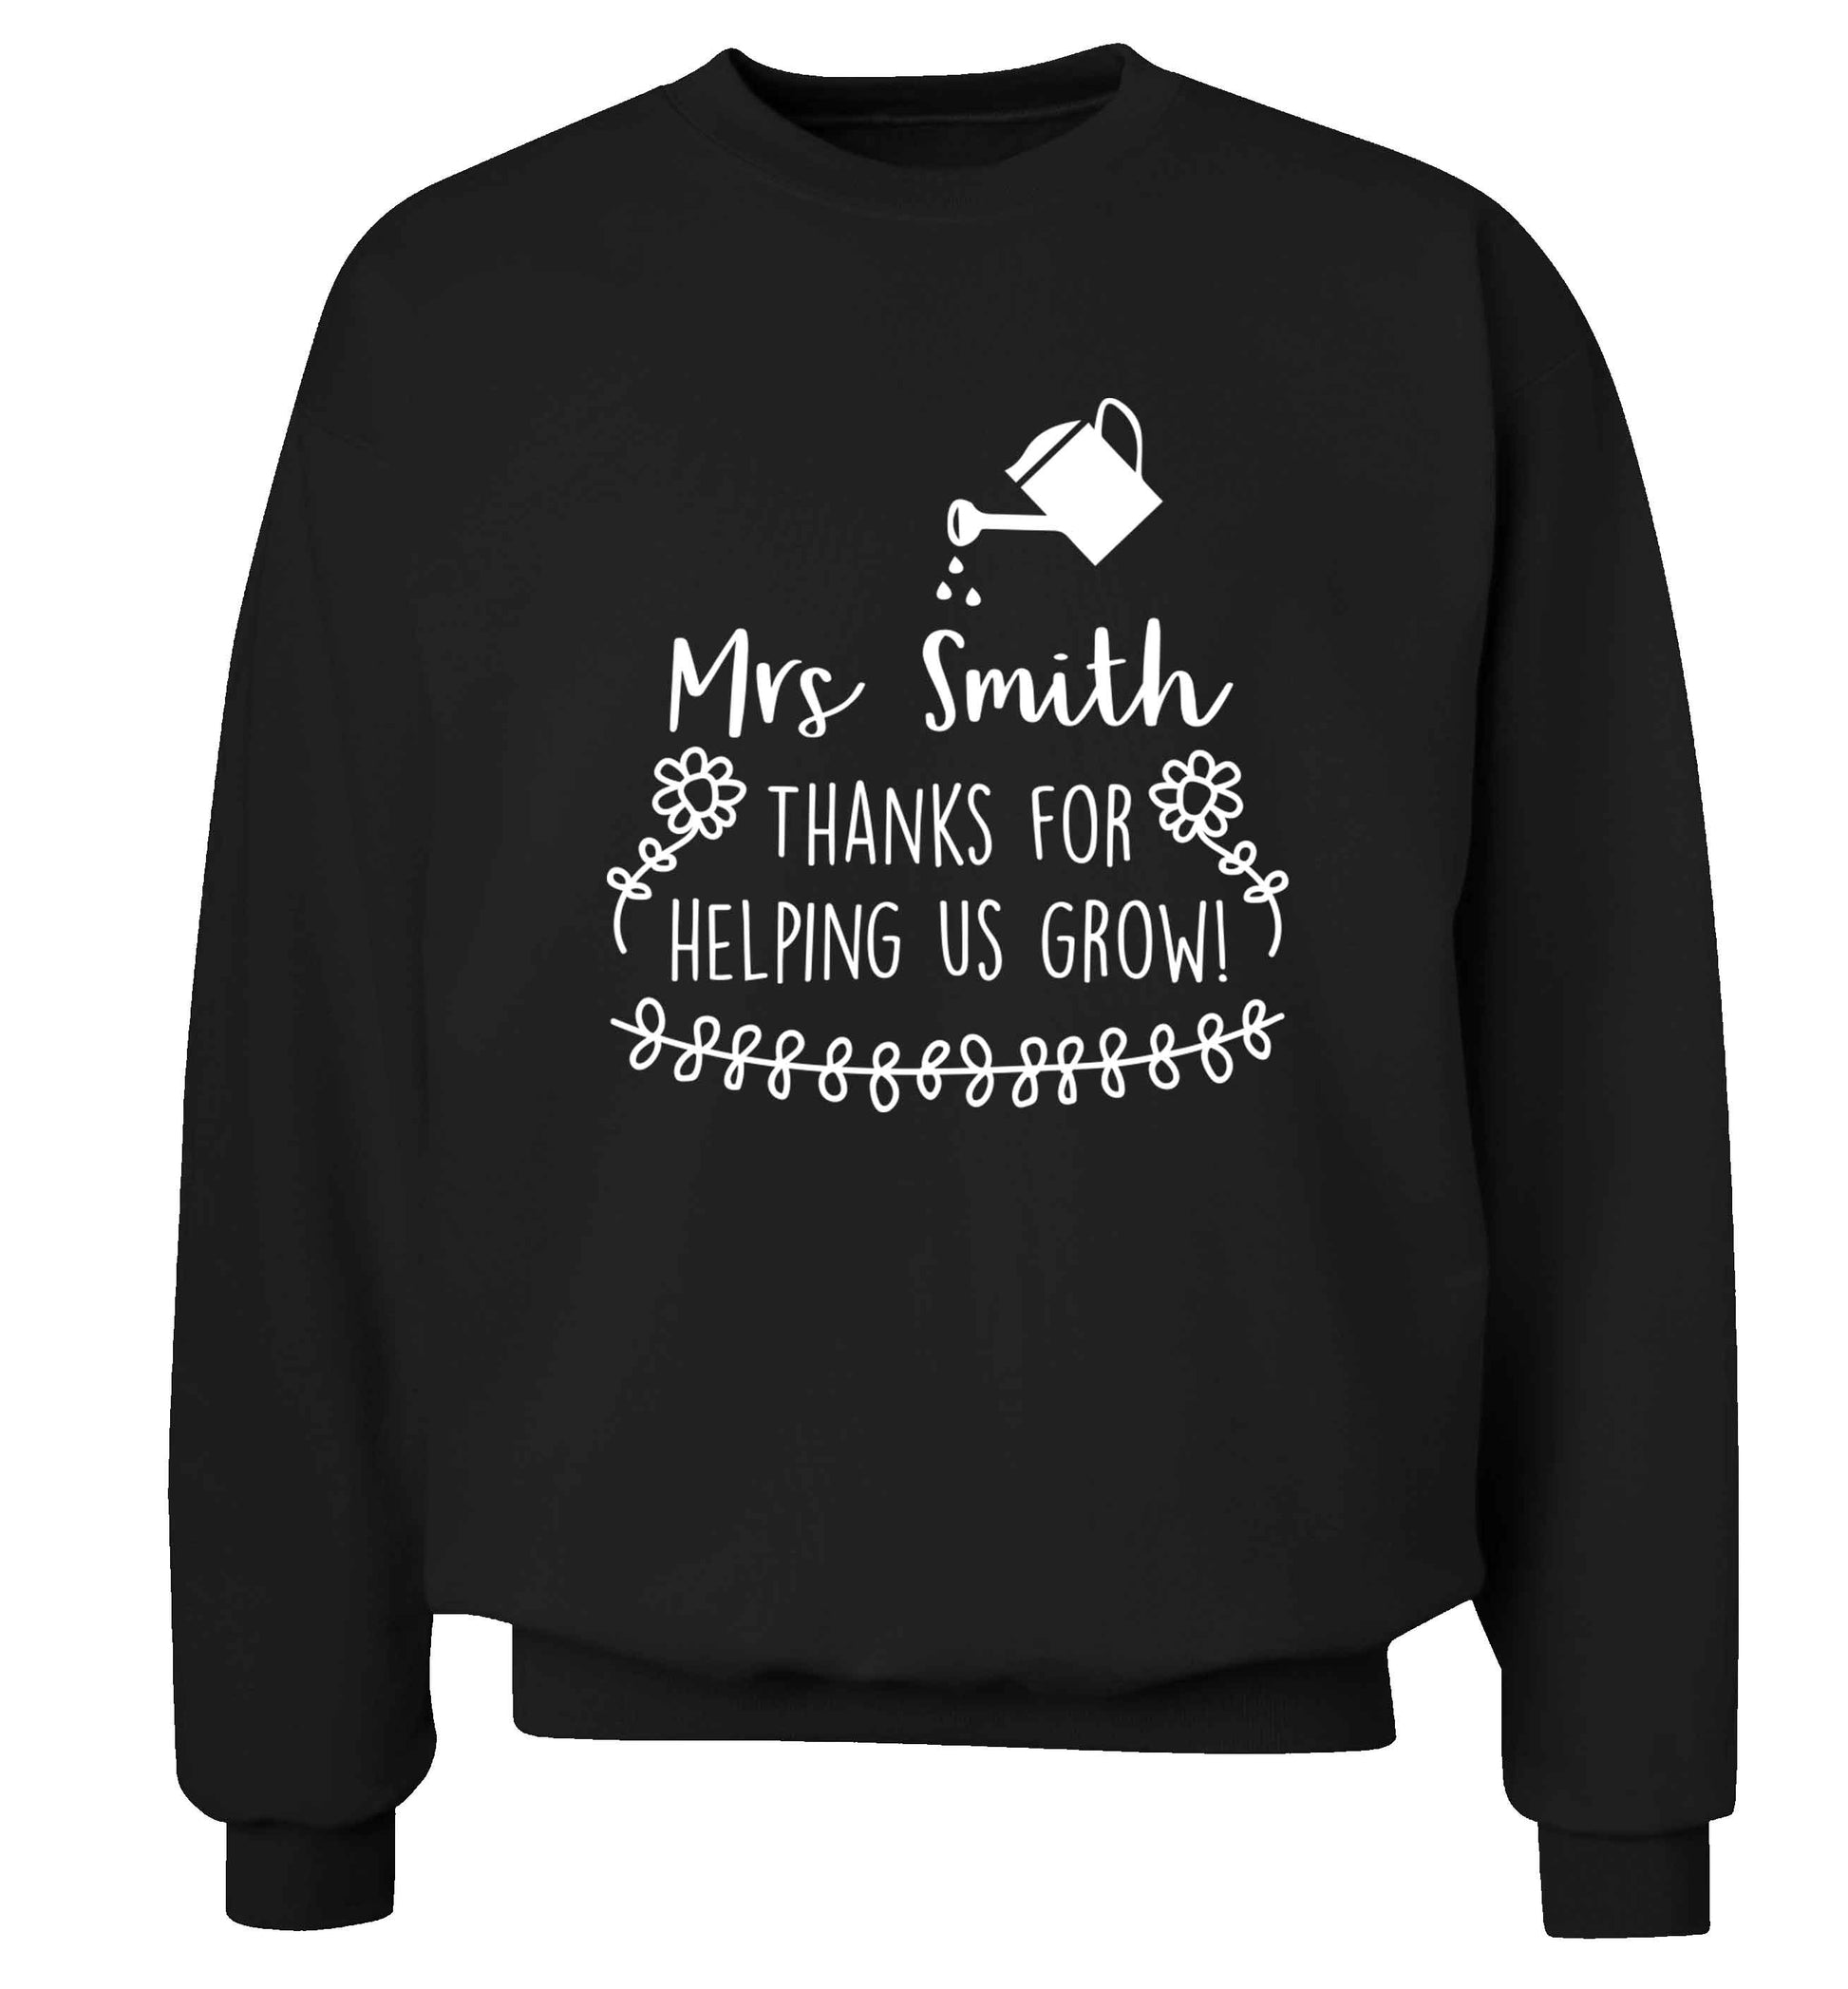 Personalised Mrs Smith thanks for helping us grow Adult's unisex black Sweater 2XL